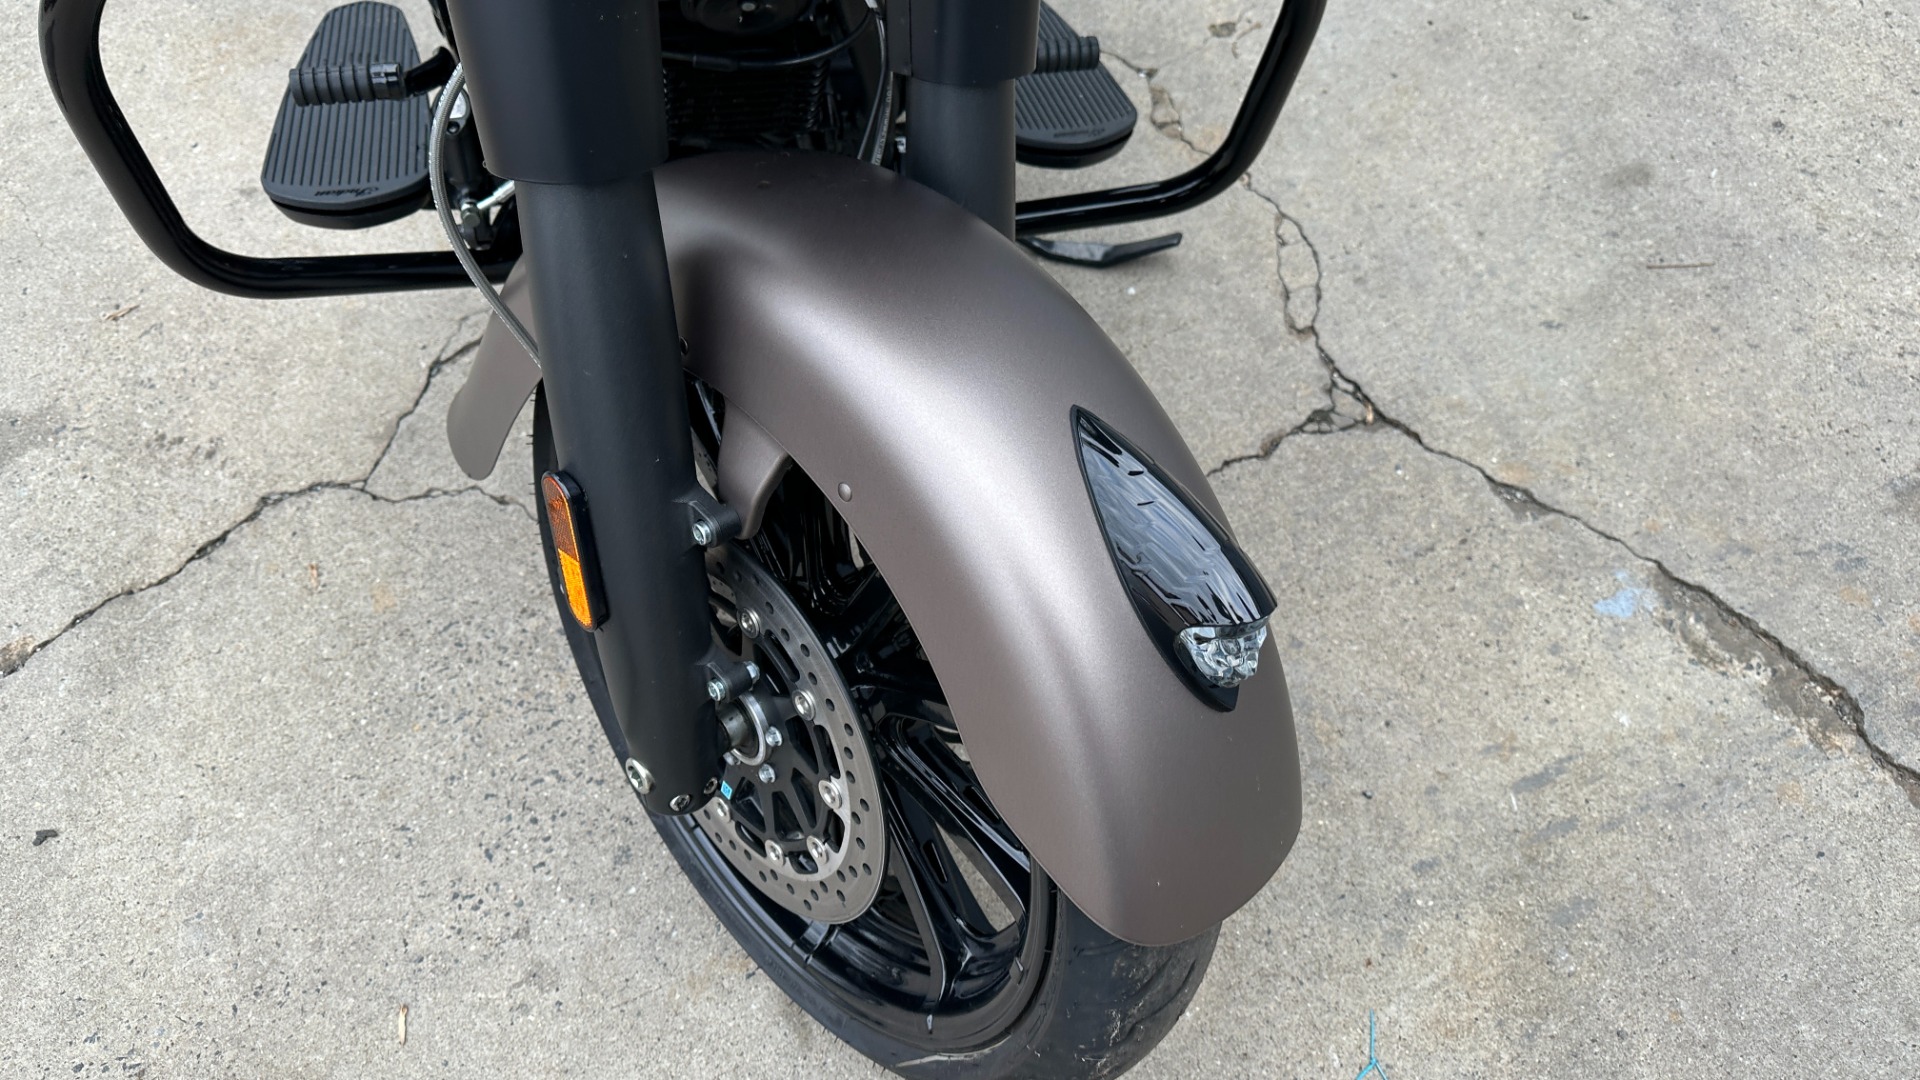 Used 2019 INDIAN CHIEFTAIN DARK HORSE / MATTE PAINT / LOW MILES / NAV / CRUISE CONTROL / TOUCHSCREEN for sale Sold at Formula Imports in Charlotte NC 28227 17